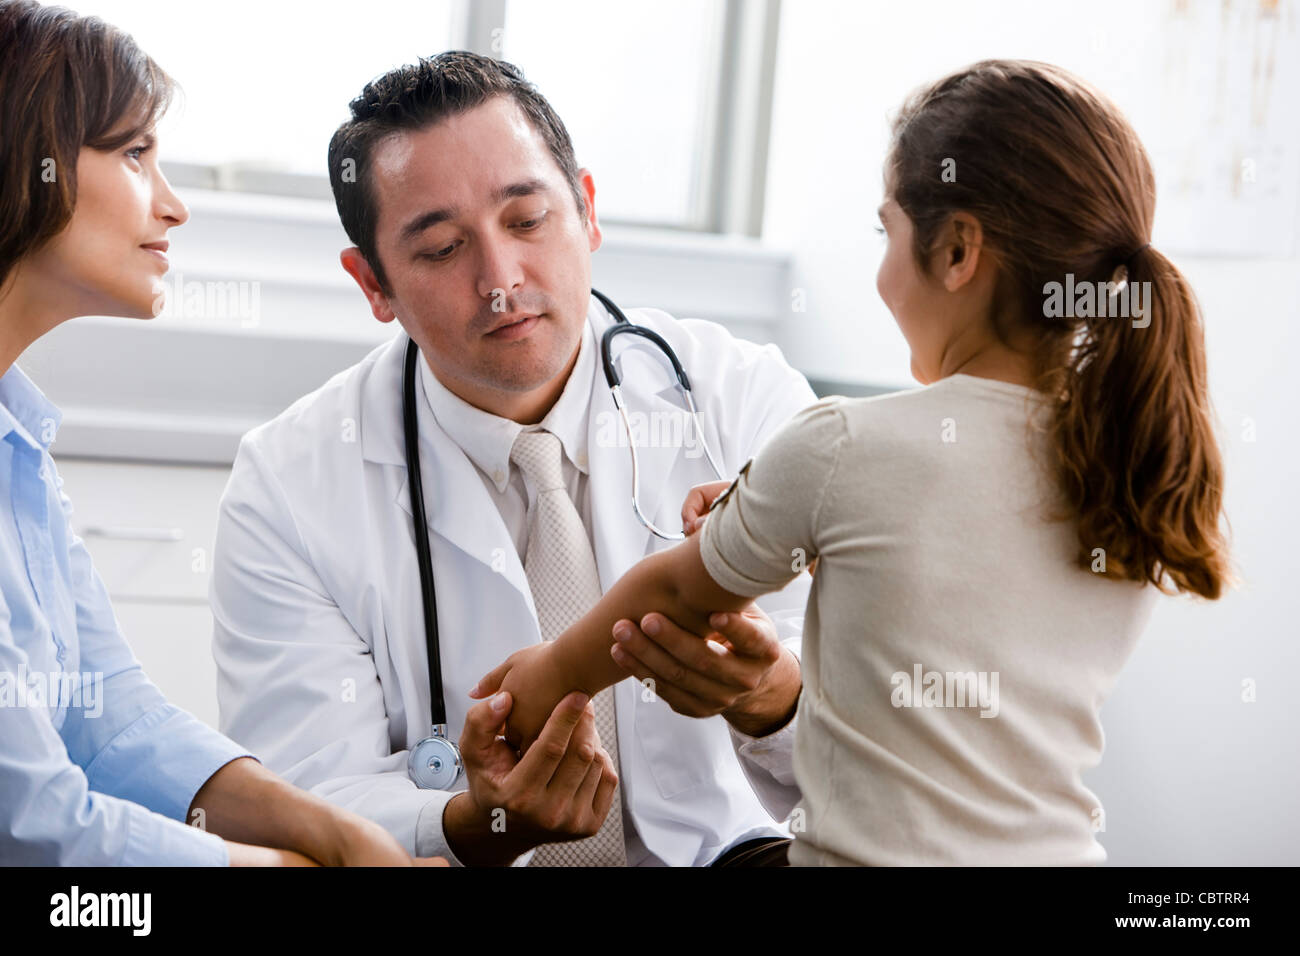 Doctor examining patient while mother watches Stock Photo